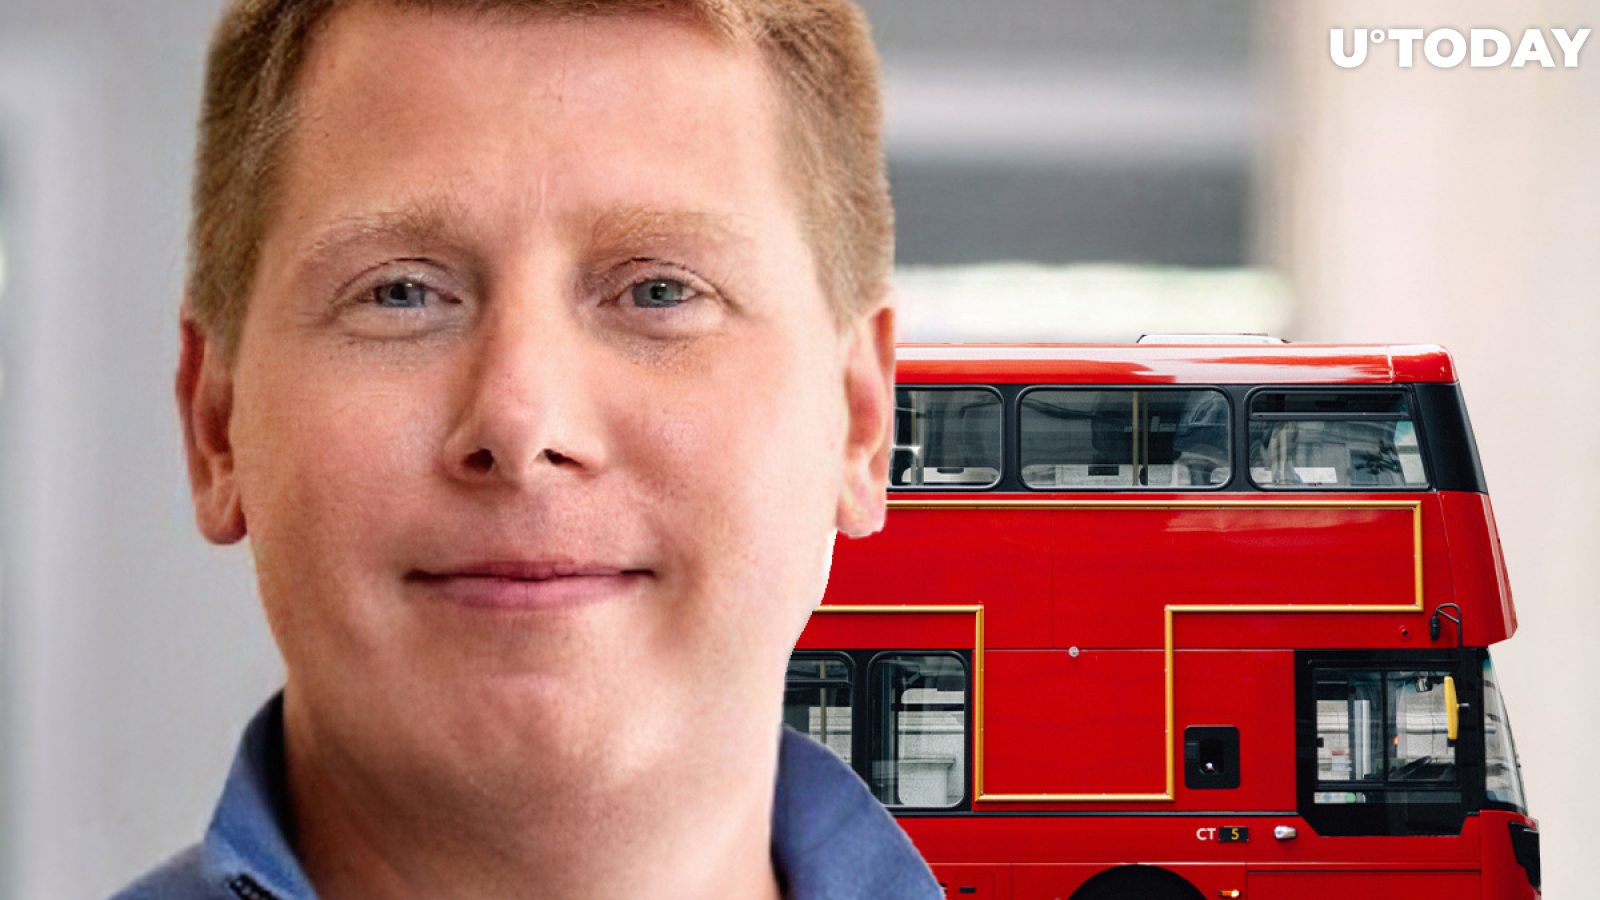 Barry Silbert-Affiliated Crypto Company’s Bitcoin Ads Banned from Buses and Underground in UK